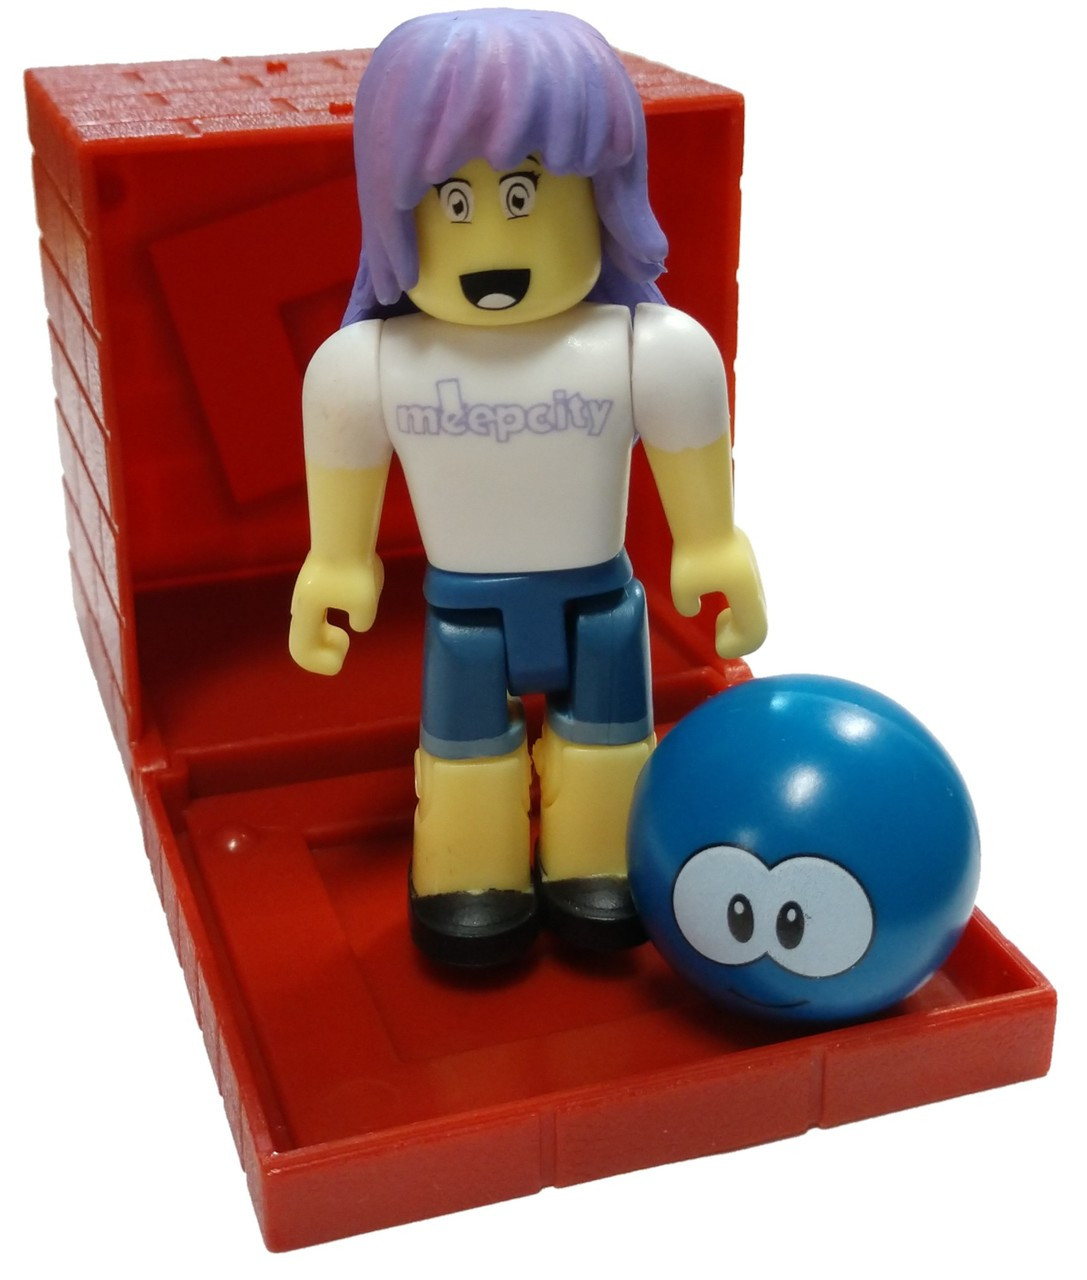 Roblox Red Series 4 Meepcity Pet Seller 3 Mini Figure With Red Cube And Online Code Loose Jazwares Toywiz - lip gloss song code roblox